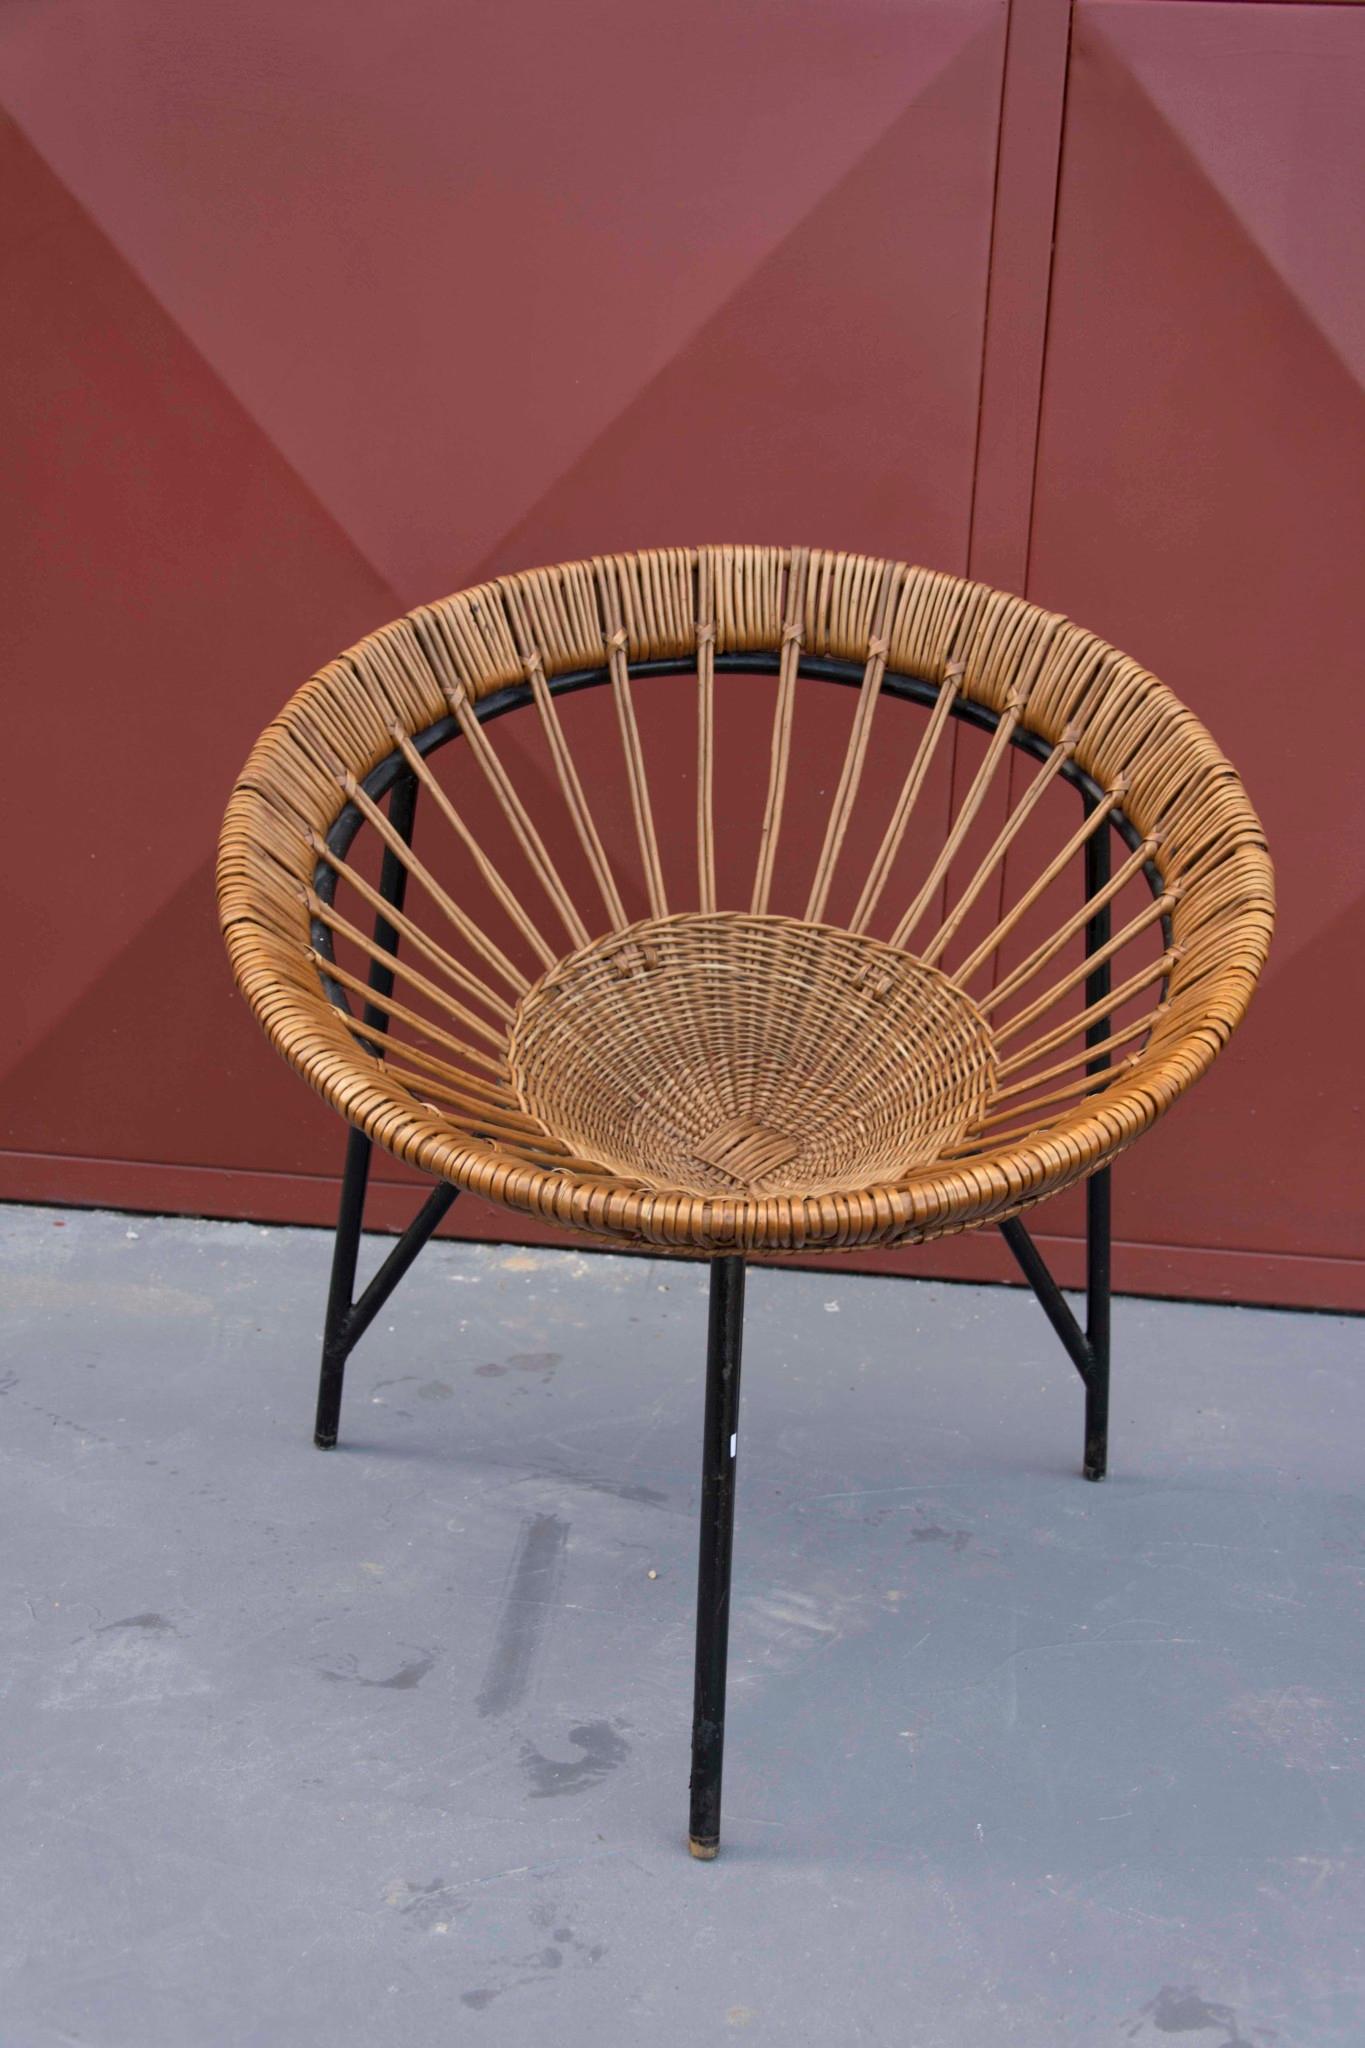 Midcentury Czech easy wicker chair, associated with the famous Expo 58 period in Brussels. It was made at the turn of 1950s and 1960s. It features a high quality wicker seat and a black metal three-legged base
In excellent original condition with